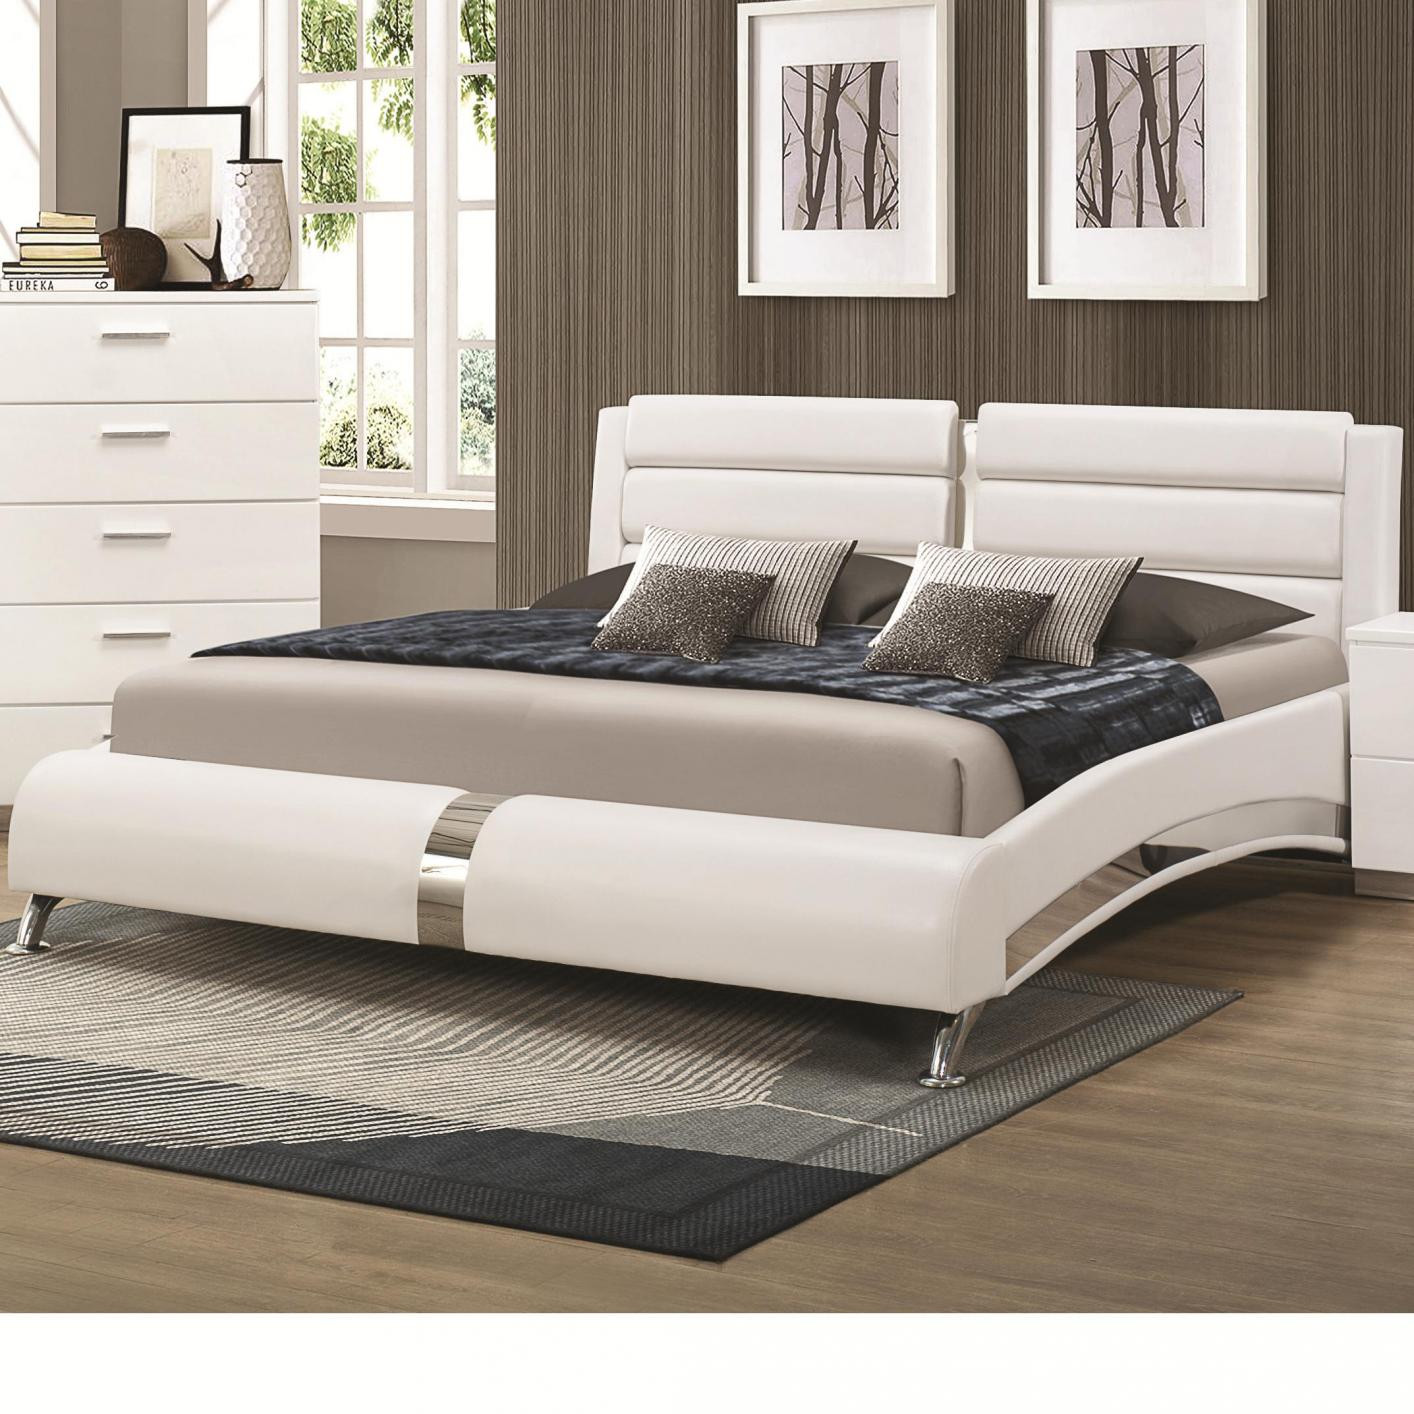 Modern King Size Bedroom Sets
 White Wood California King Size Bed Steal A Sofa